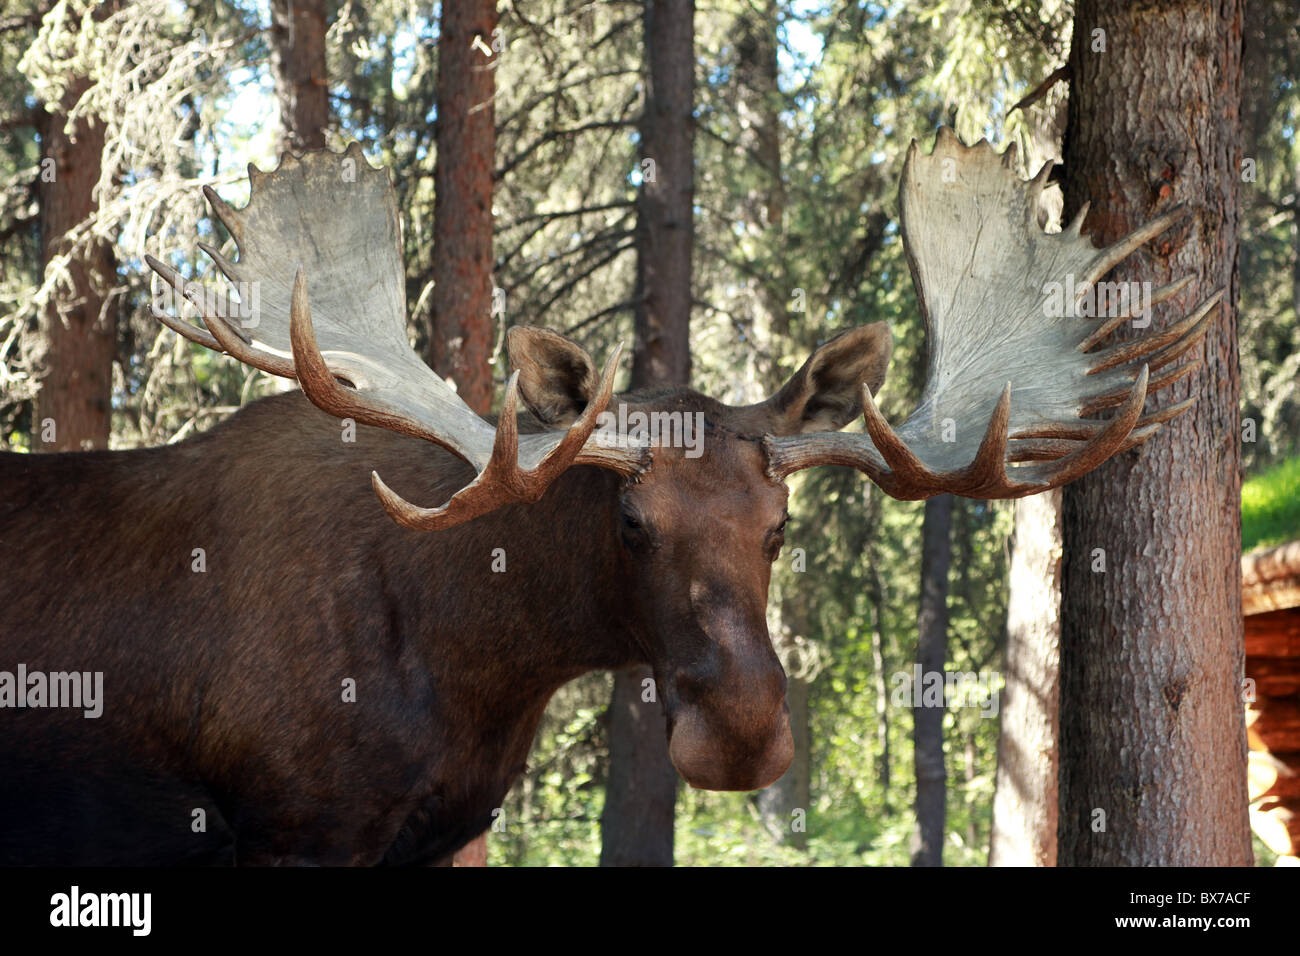 A big male, bull moose, wildlife, with antlers walking in a forest in an Alaskan fishing village, Fairbanks, Alaska, USA. Stock Photo